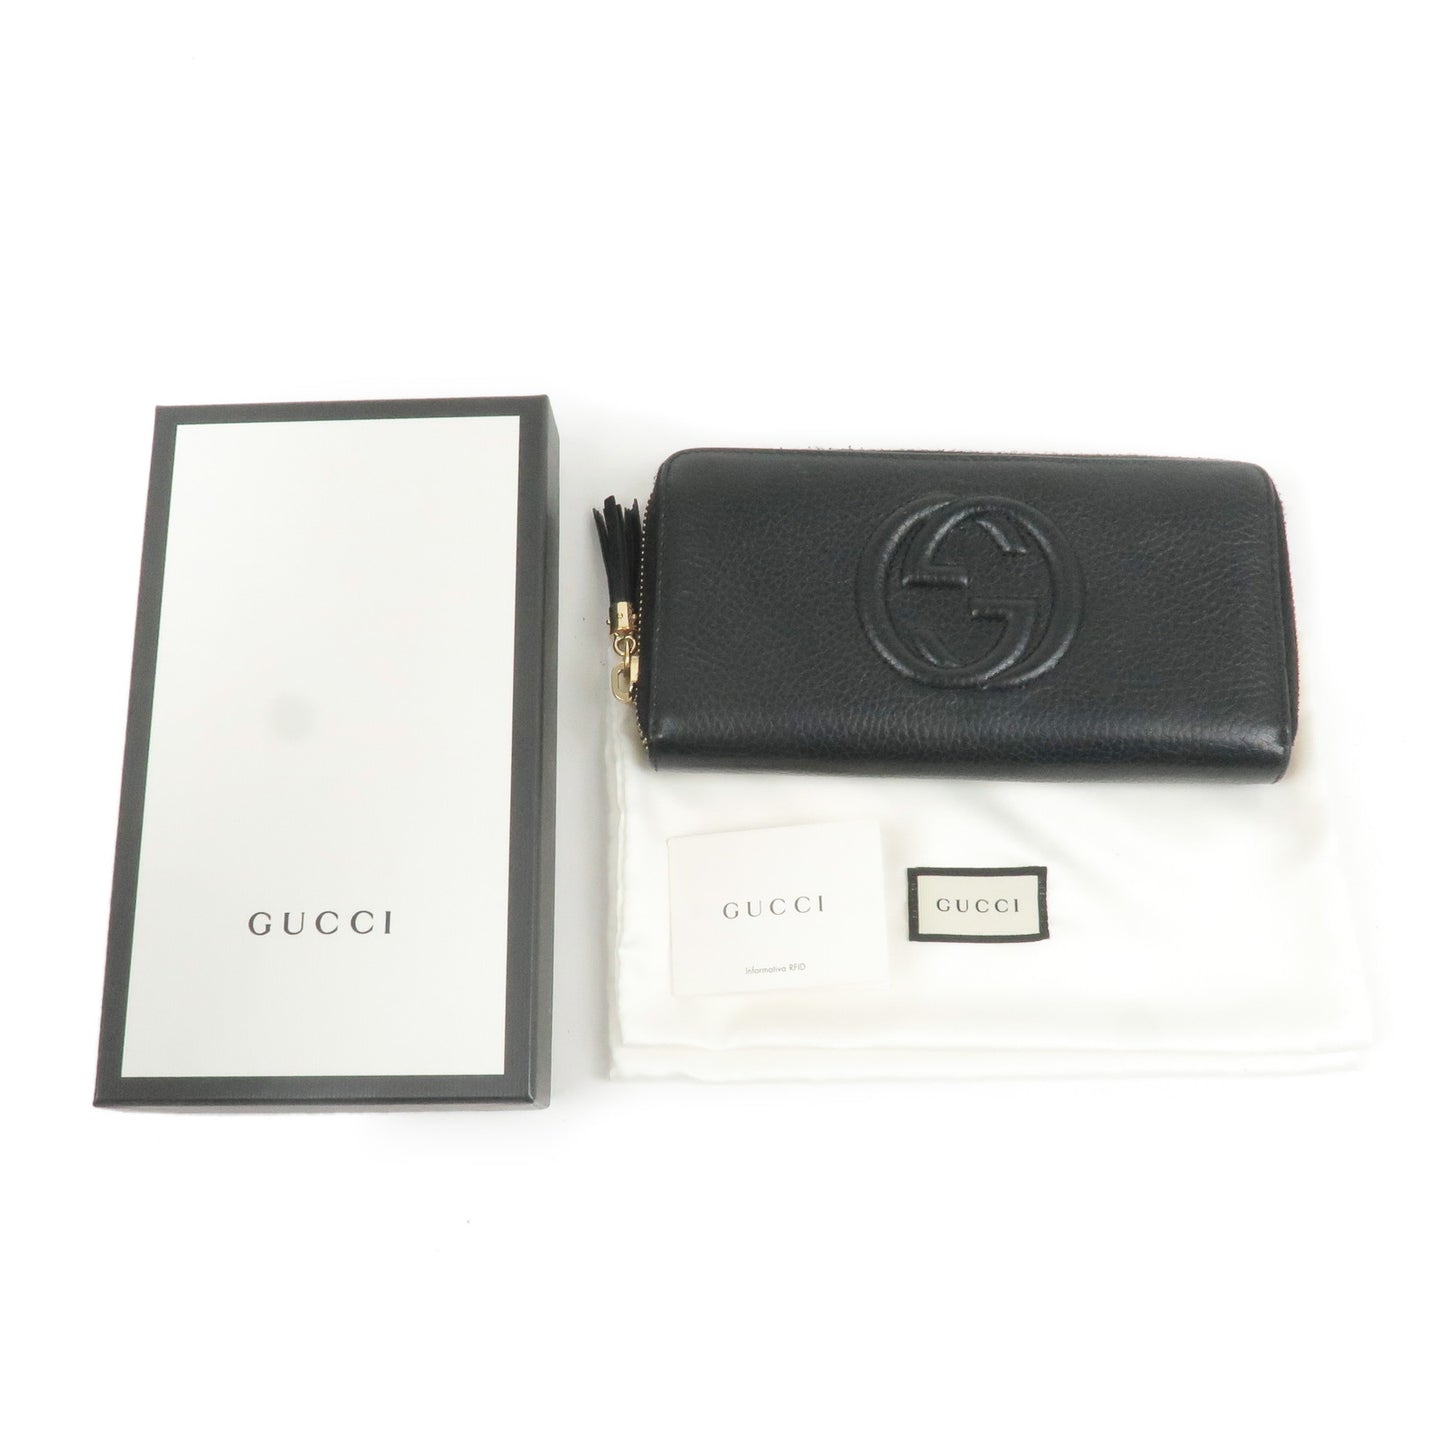 GUCCI SOHO Leather Round Zipper Long Wallet Black 598187